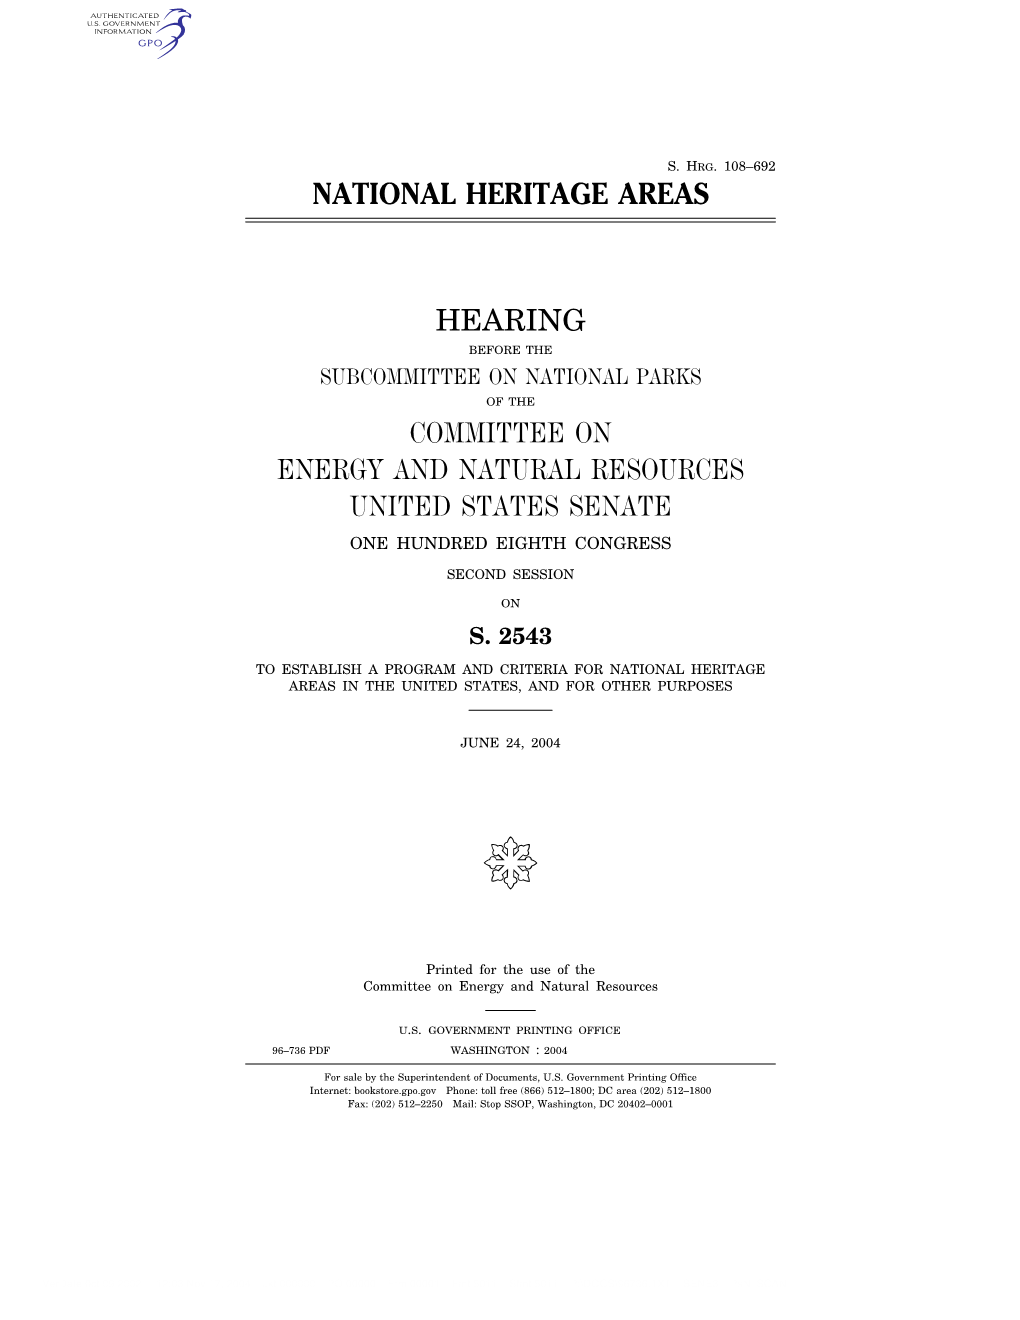 National Heritage Areas Hearing Committee on Energy and Natural Resources United States Senate